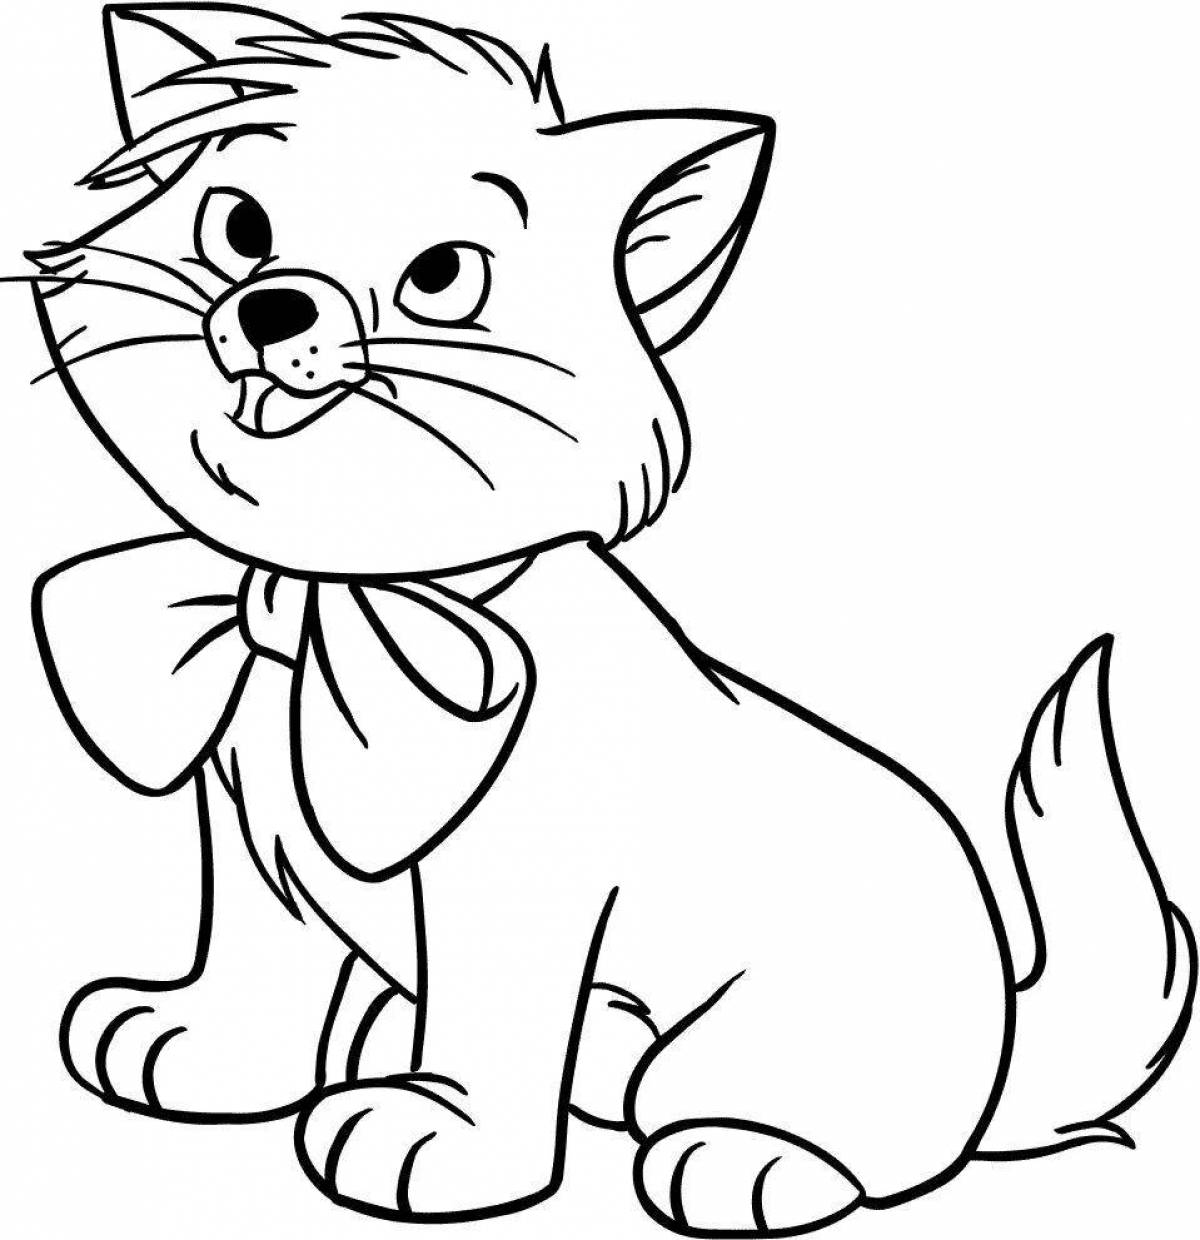 Coloring book sly cat for kids